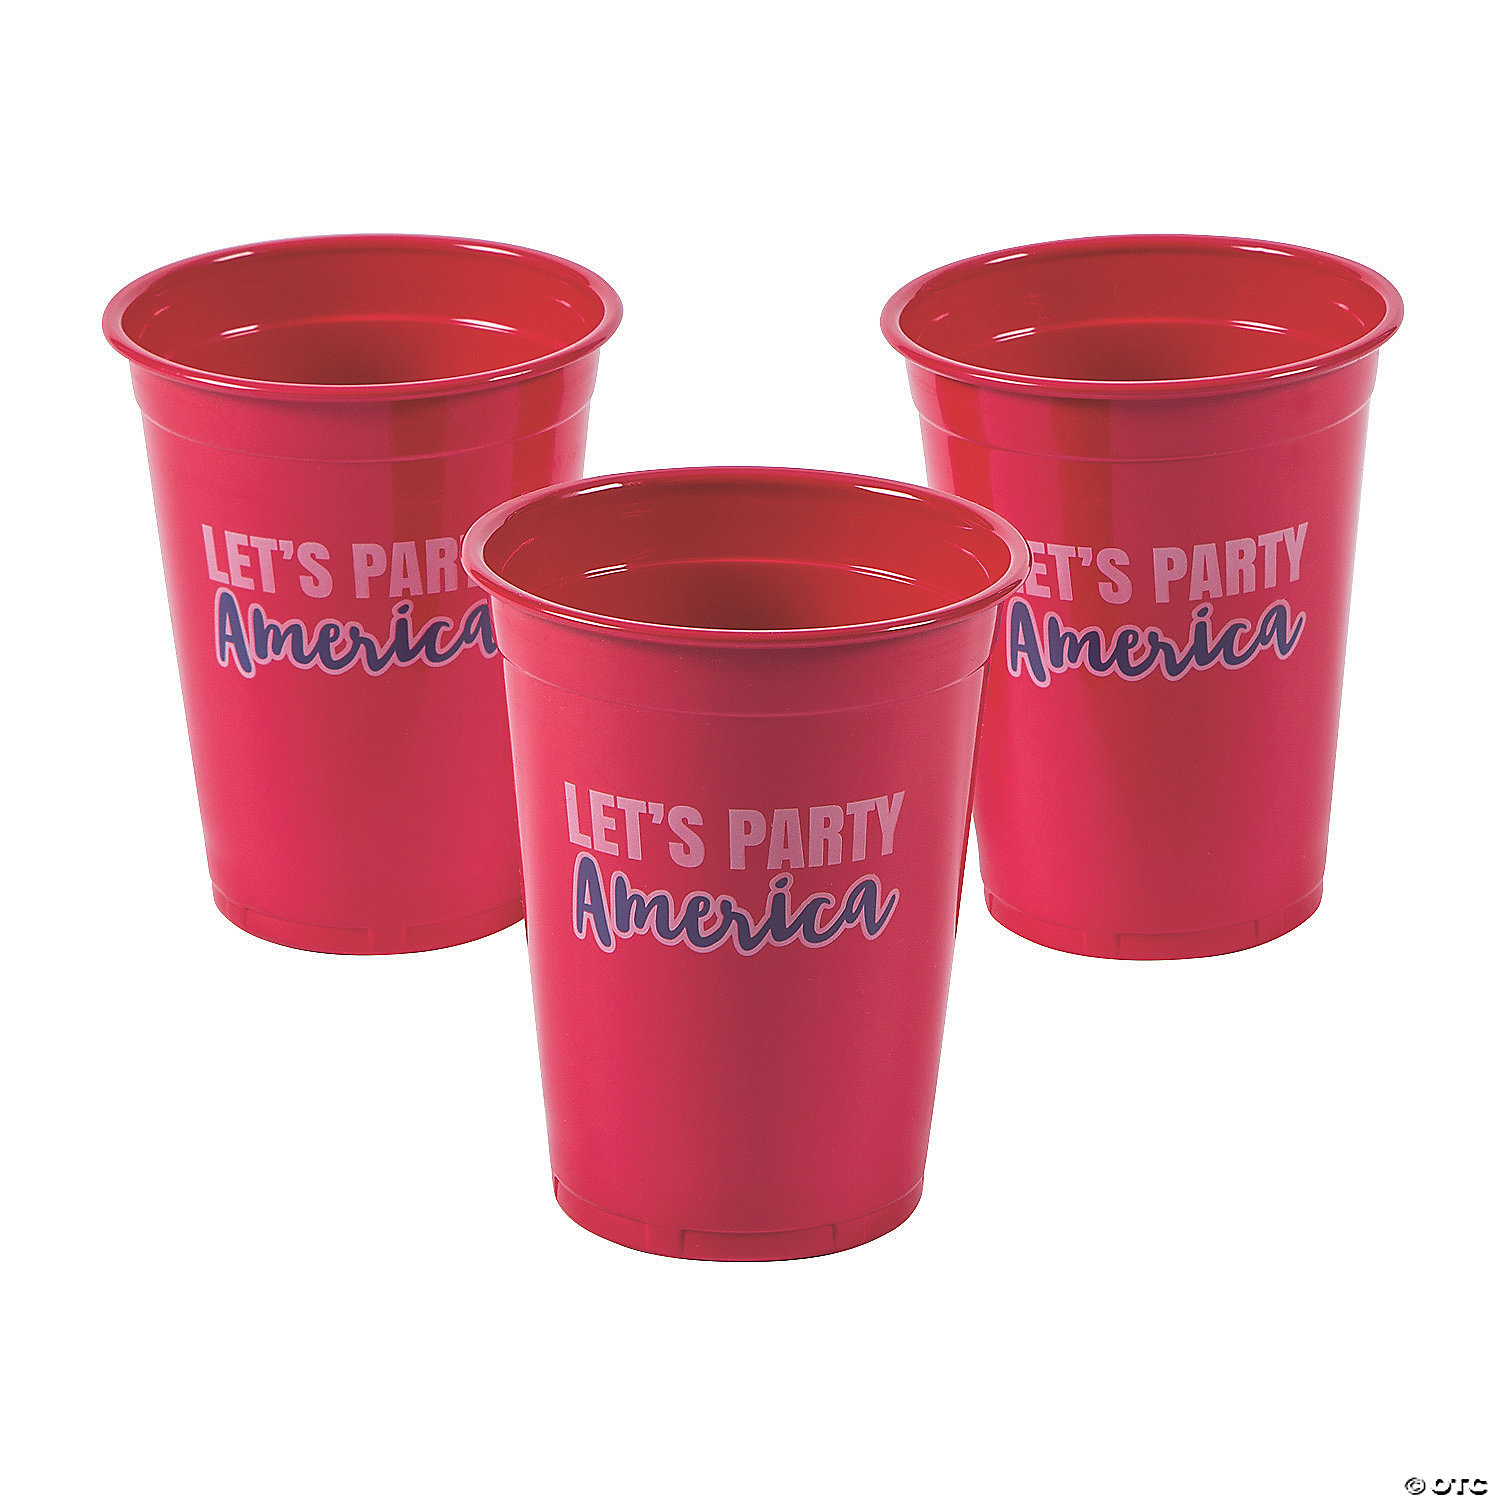 25pc Party Supplies 70s Party Disposable Cups Party Disposable Cups Drinkware for Party Fun Express 25 Pieces